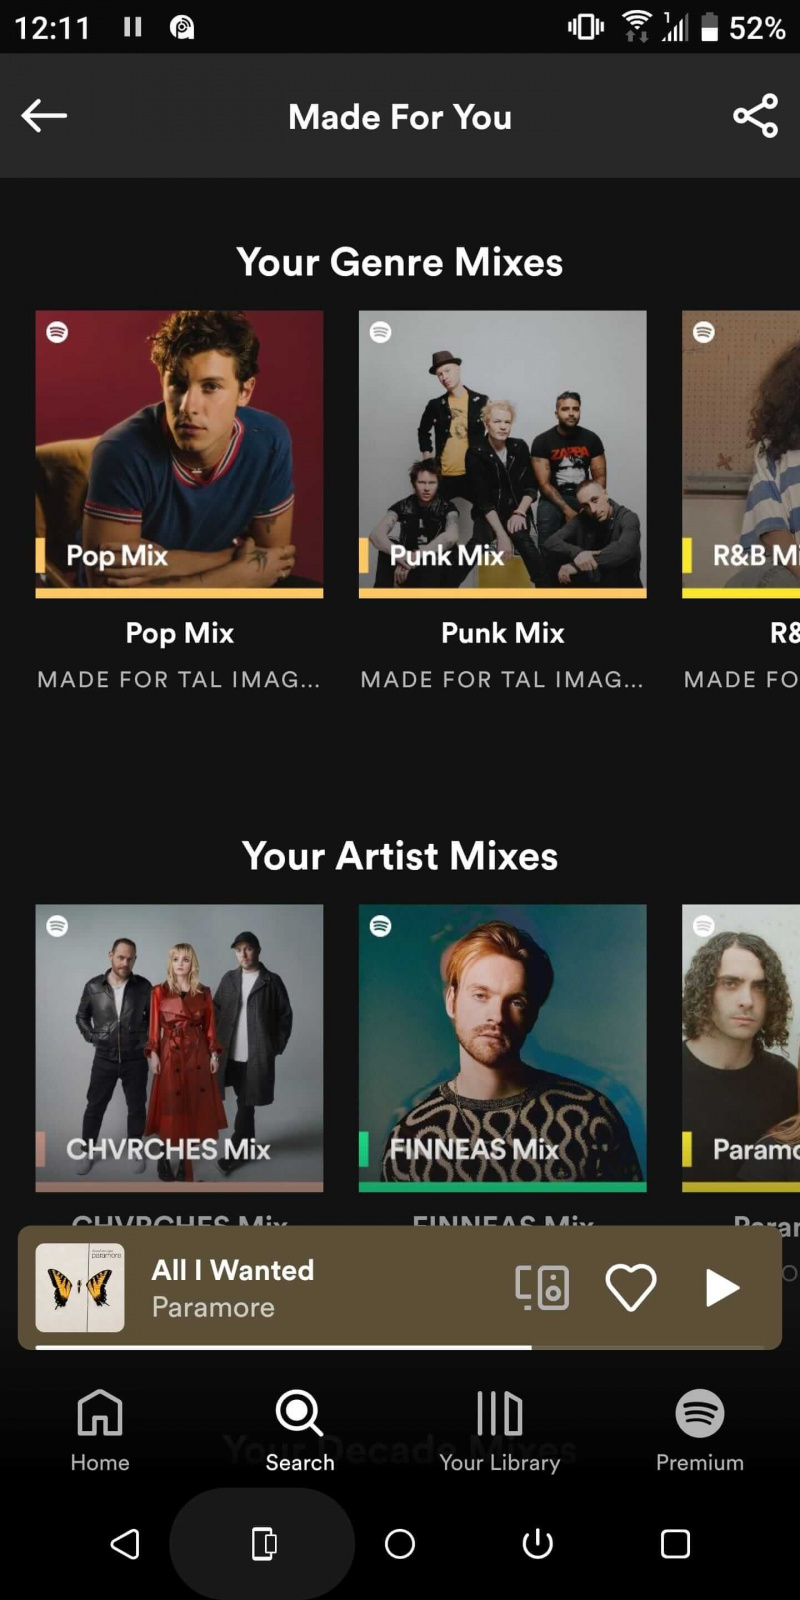   Spotify Made For You Daftar Putar